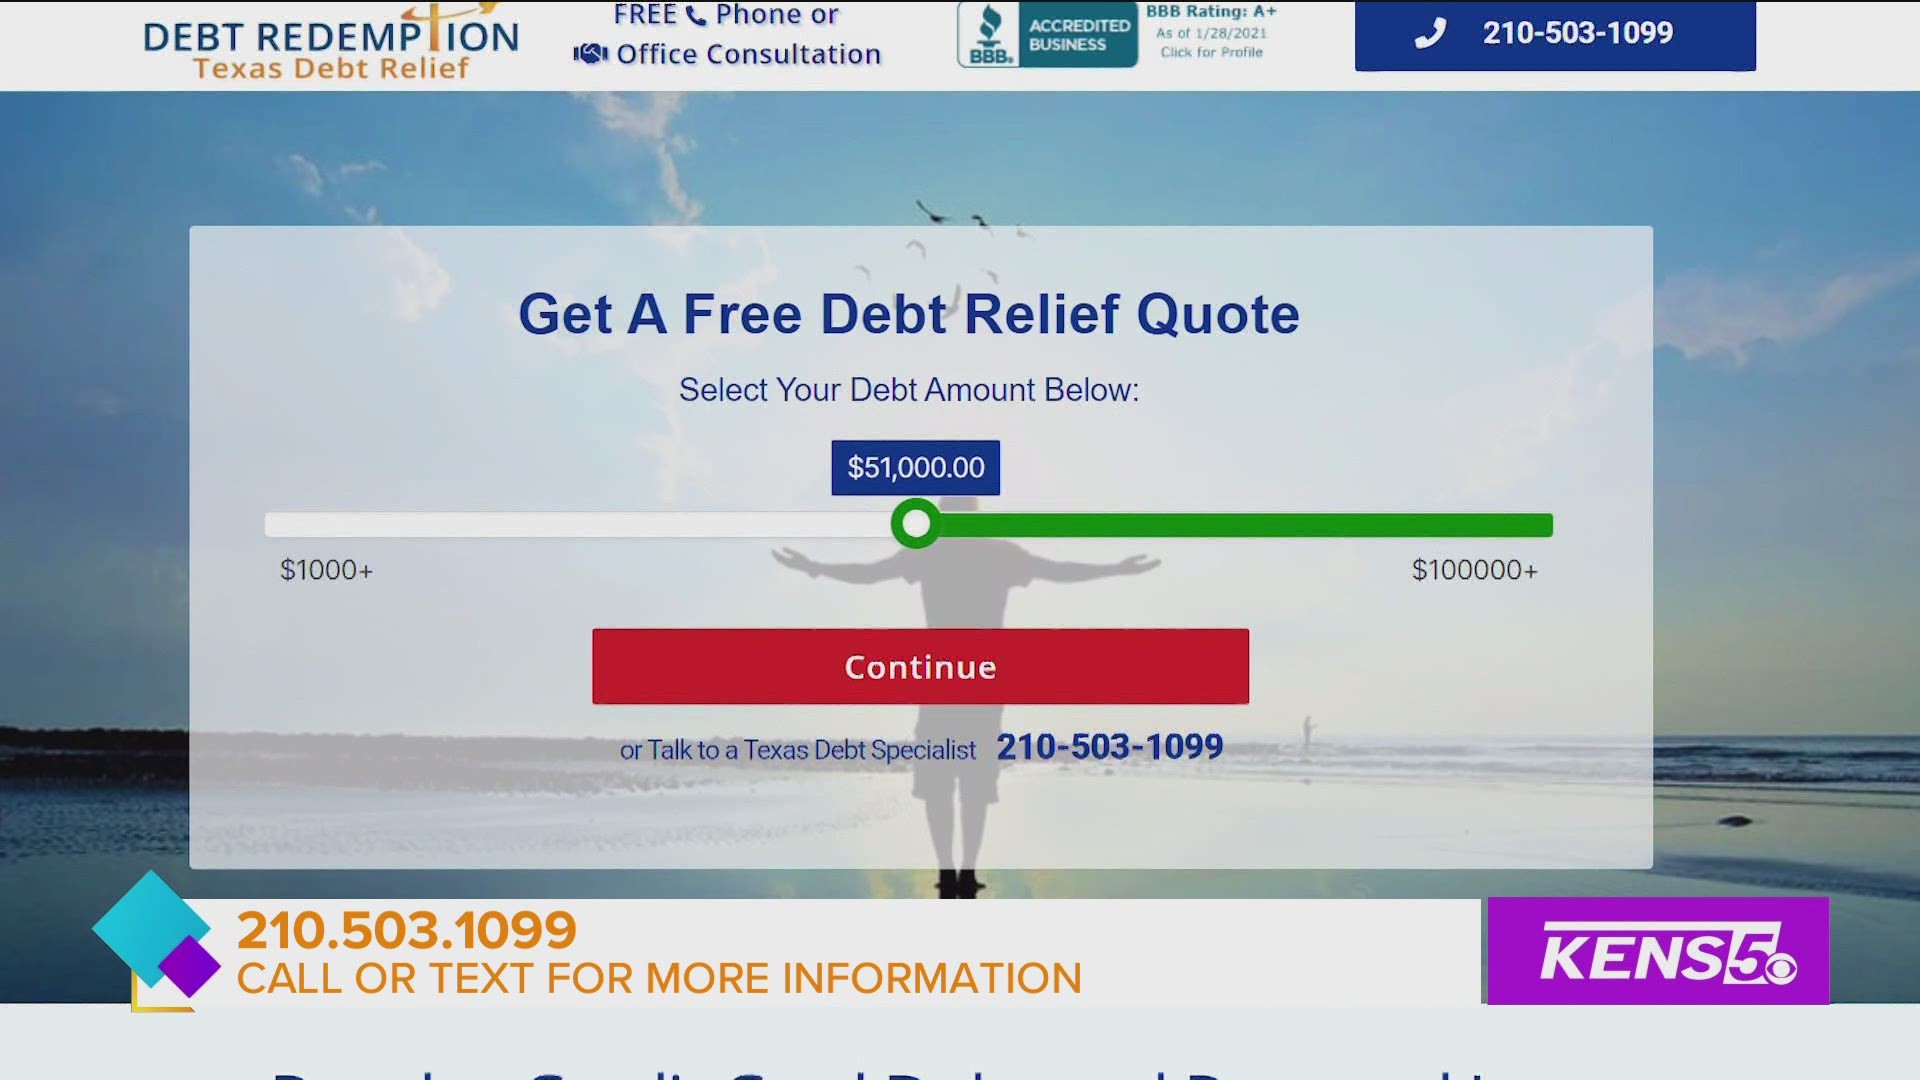 Debt Redemption Texas Debt Relief offers a solution to your debt that could save you money.